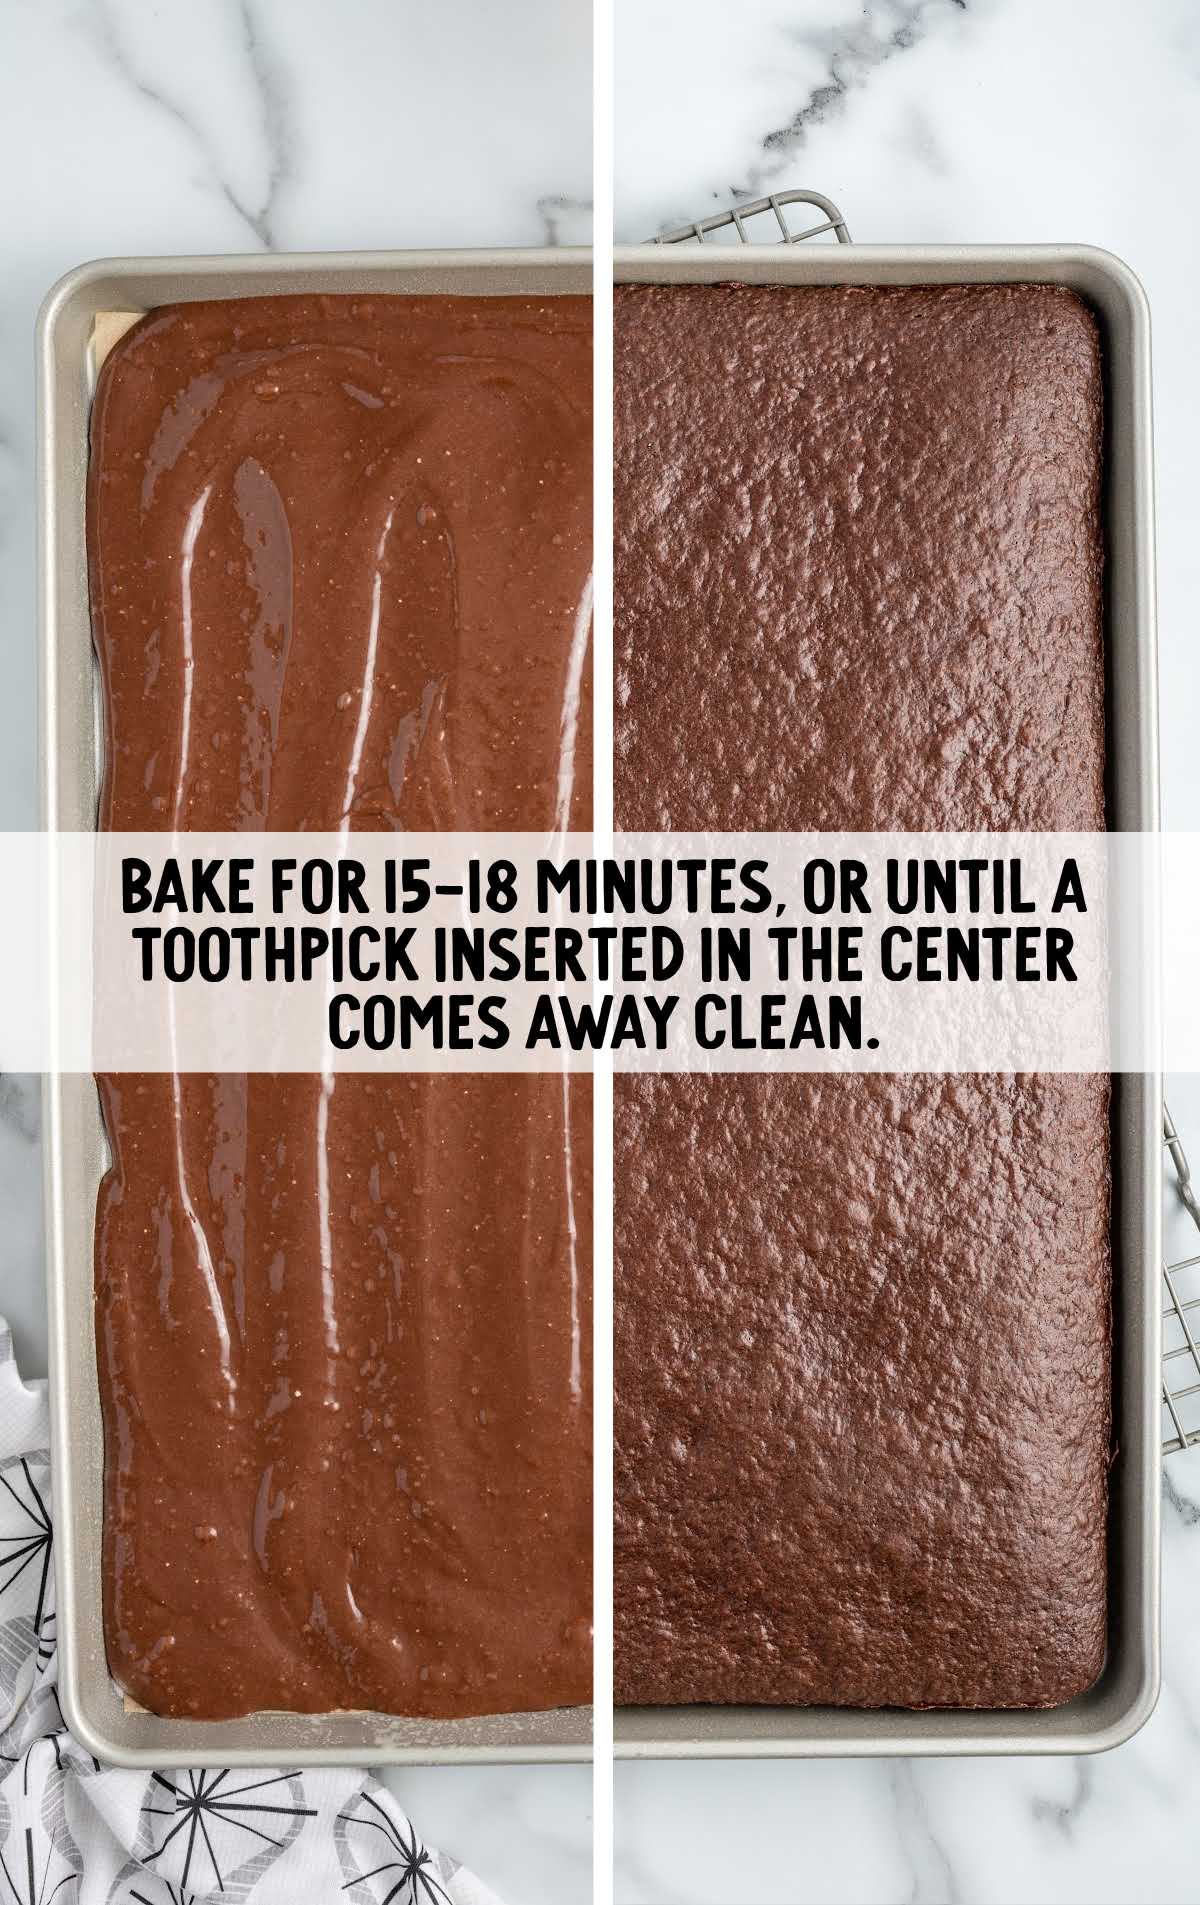 bake the batter until toothpick comes away clean